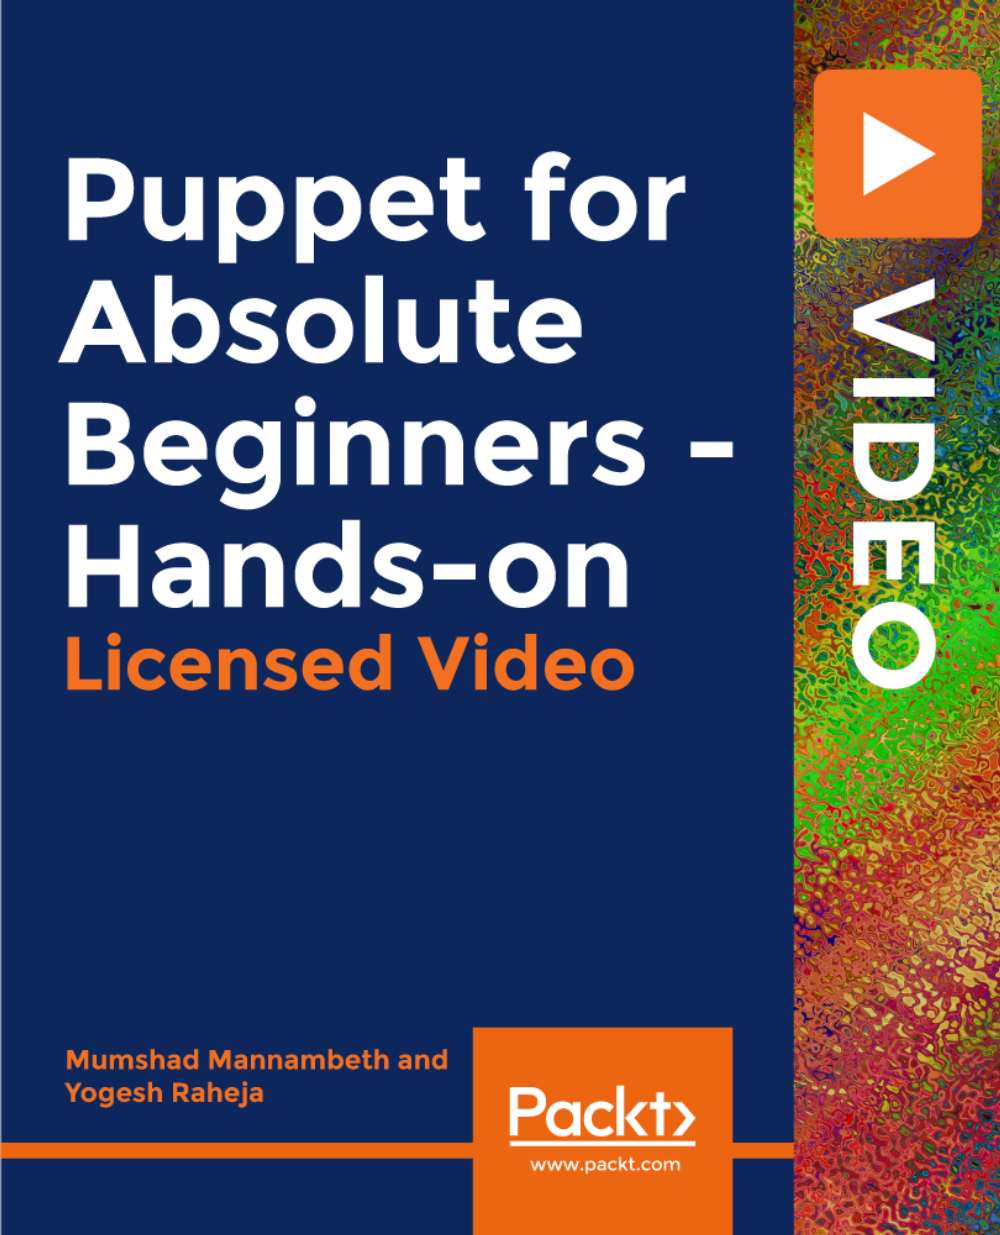 Puppet for Absolute Beginners - Hands-on